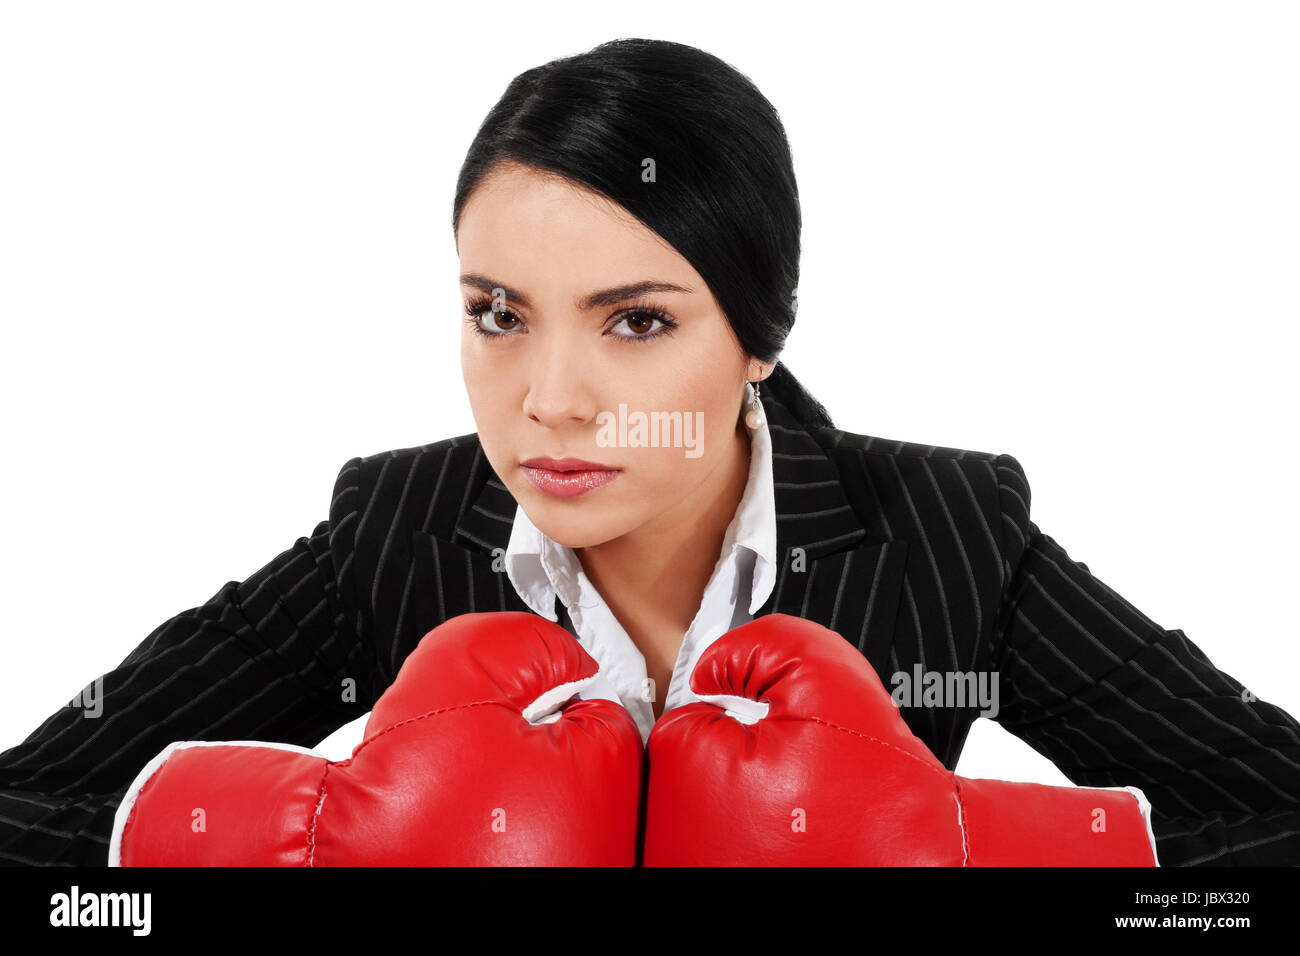 Stock image of businesswoman with boxing gloves isolated on white background Stock Photo